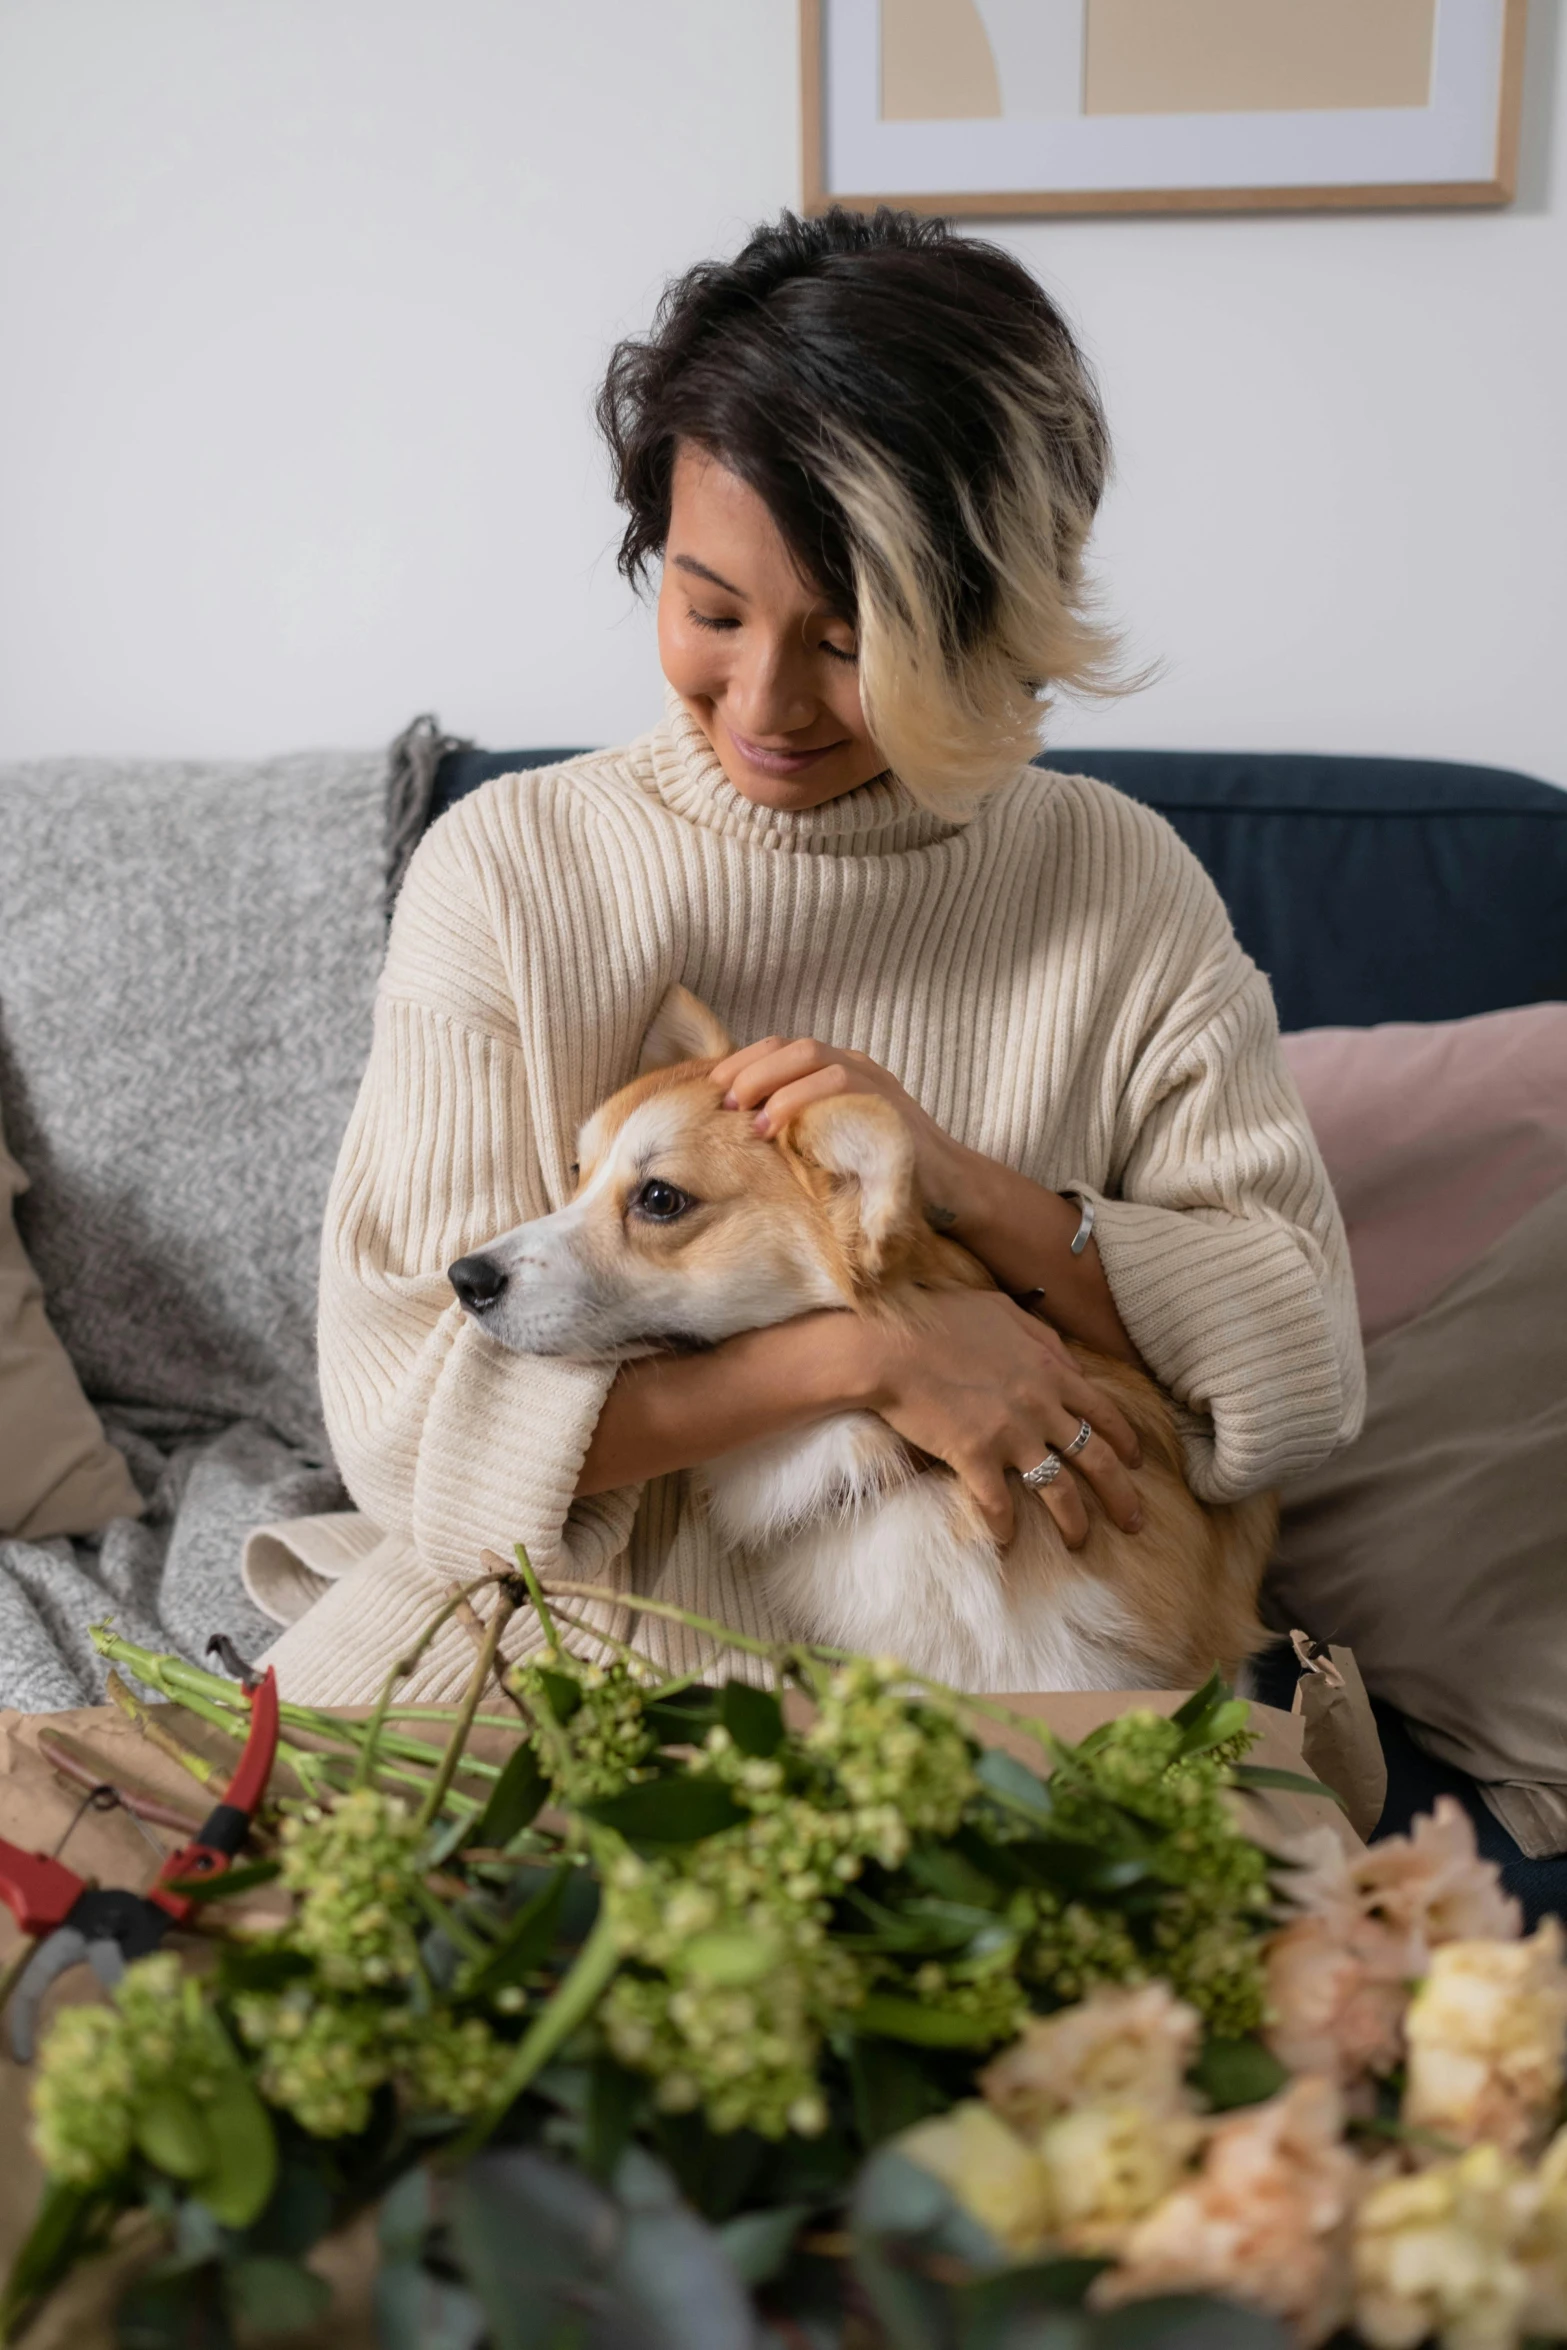 a woman sitting on a couch holding a dog, pexels contest winner, romanticism, with flowers and plants, wearing casual sweater, cornucopia, australian